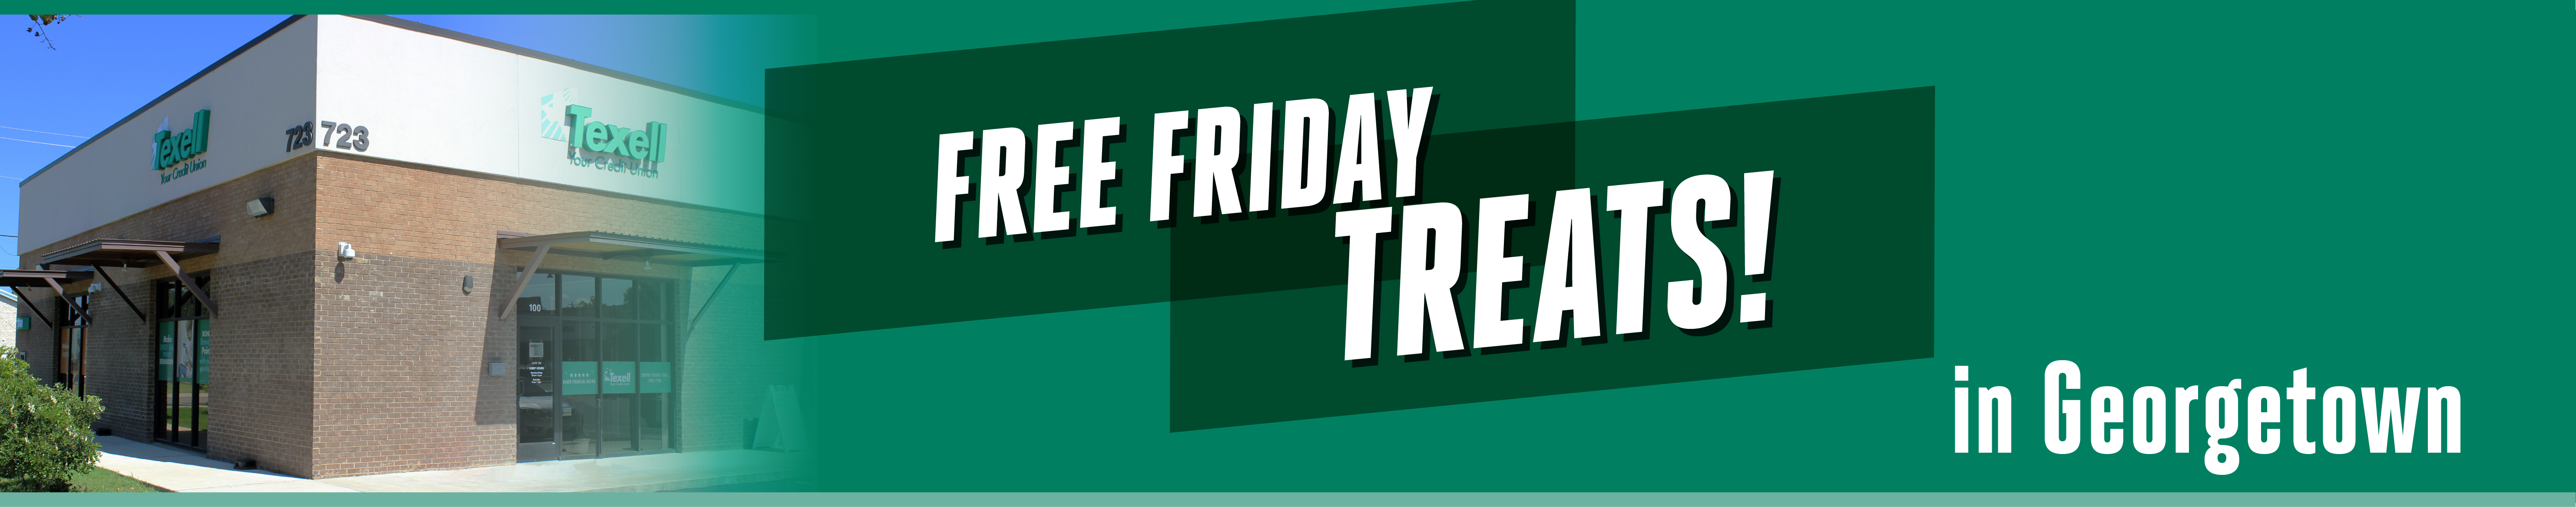 IMAGE: Front of Georgetown branch with text Free Friday Treats in Georgetown!